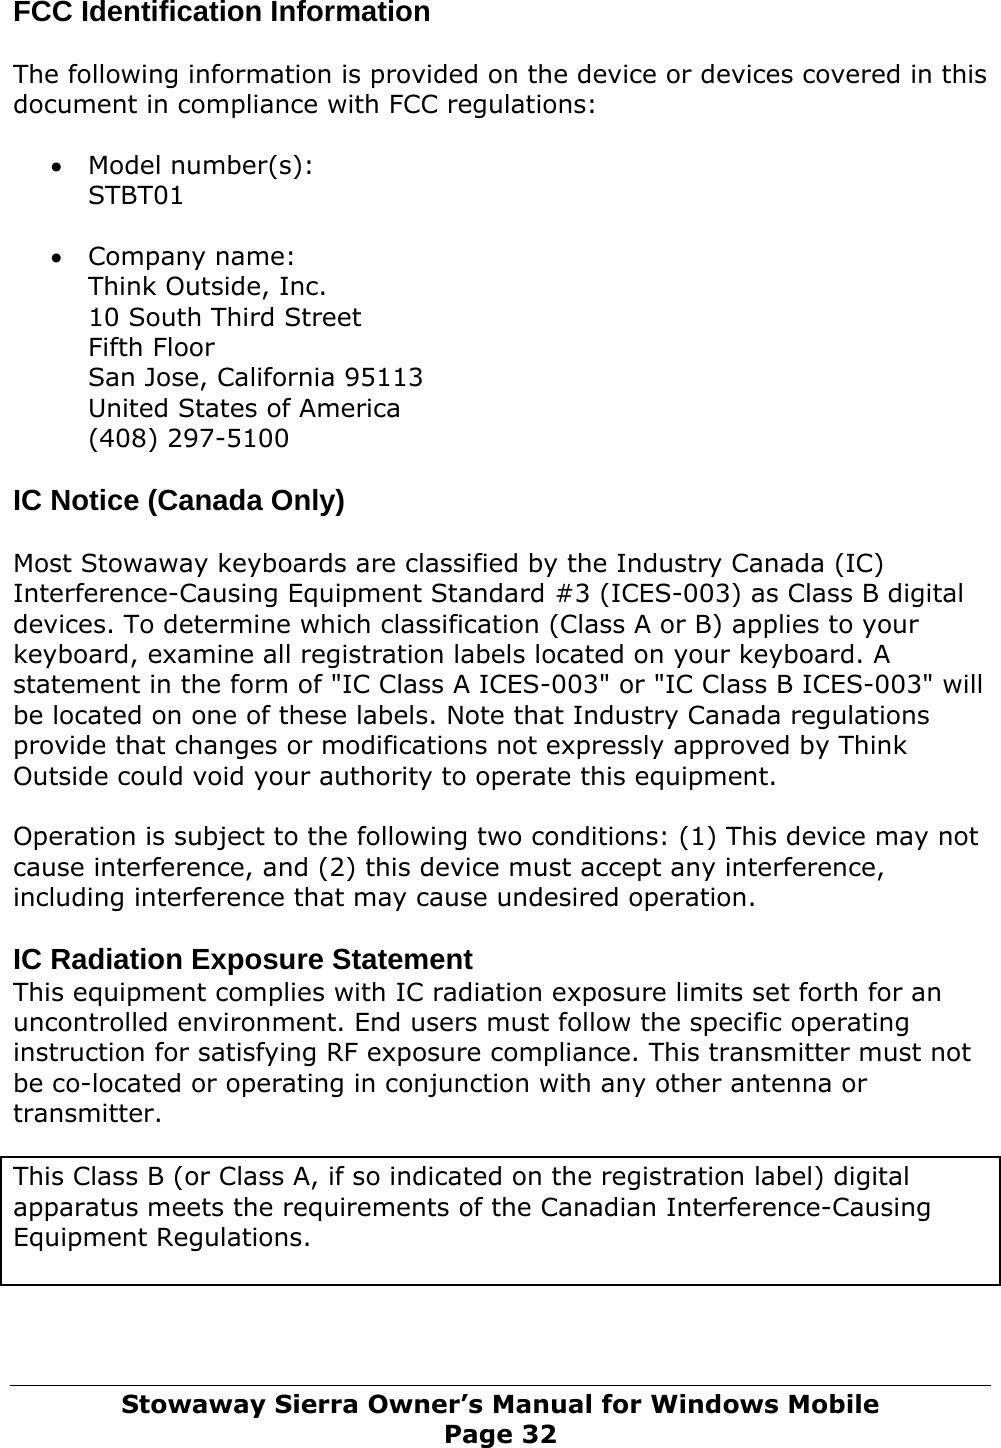 FCC Identification Information  The following information is provided on the device or devices covered in this document in compliance with FCC regulations:  • Model number(s): STBT01  • Company name: Think Outside, Inc. 10 South Third Street Fifth Floor San Jose, California 95113 United States of America (408) 297-5100  IC Notice (Canada Only)   Most Stowaway keyboards are classified by the Industry Canada (IC) Interference-Causing Equipment Standard #3 (ICES-003) as Class B digital devices. To determine which classification (Class A or B) applies to your keyboard, examine all registration labels located on your keyboard. A statement in the form of &quot;IC Class A ICES-003&quot; or &quot;IC Class B ICES-003&quot; will be located on one of these labels. Note that Industry Canada regulations provide that changes or modifications not expressly approved by Think Outside could void your authority to operate this equipment.   Operation is subject to the following two conditions: (1) This device may not cause interference, and (2) this device must accept any interference, including interference that may cause undesired operation.  IC Radiation Exposure Statement This equipment complies with IC radiation exposure limits set forth for an uncontrolled environment. End users must follow the specific operating instruction for satisfying RF exposure compliance. This transmitter must not be co-located or operating in conjunction with any other antenna or transmitter.  This Class B (or Class A, if so indicated on the registration label) digital apparatus meets the requirements of the Canadian Interference-Causing Equipment Regulations.  Stowaway Sierra Owner’s Manual for Windows Mobile Page 32 